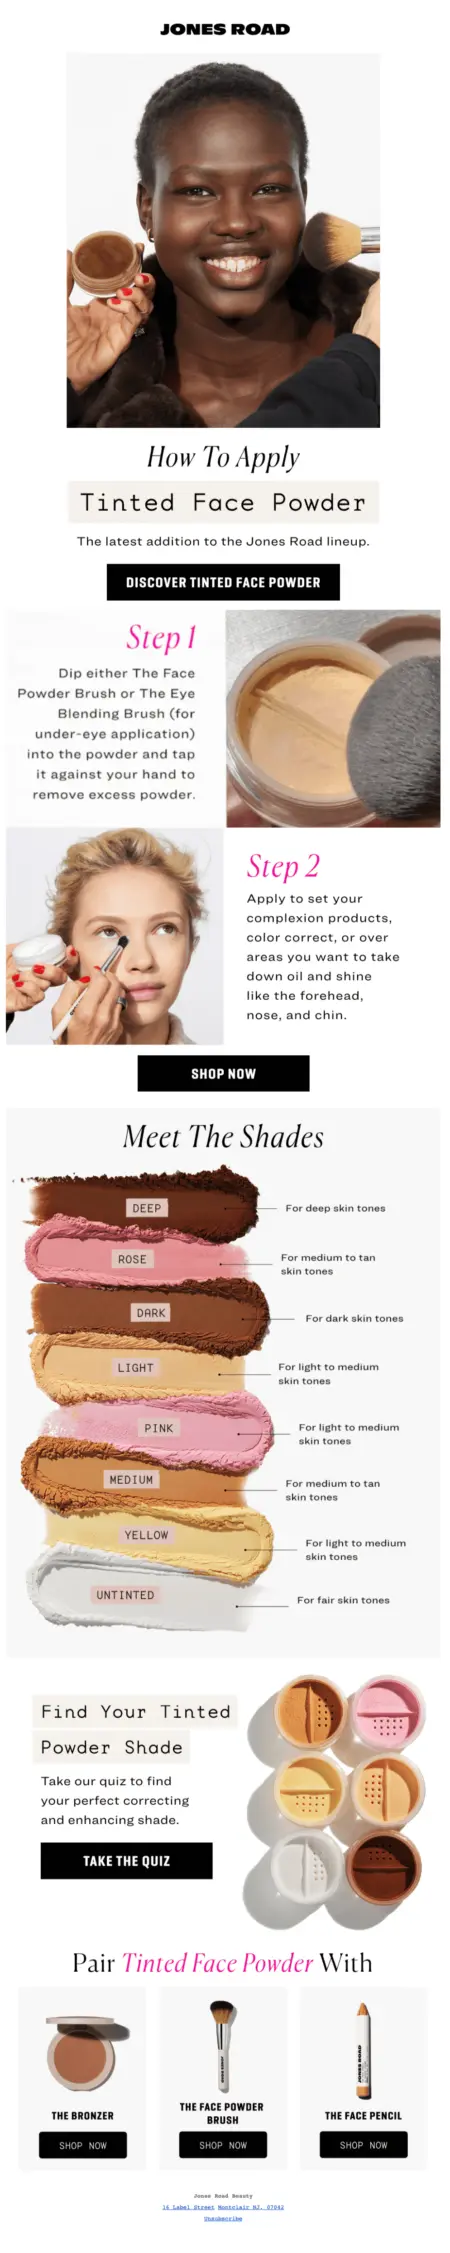 Image shows an educational email from Jones Road Beauty featuring a tinted face powder and step-by-step instructions on how to apply it. It also includes an eye-catching visual of each shade and a link to a quiz a subscriber can take to find their perfect shade.